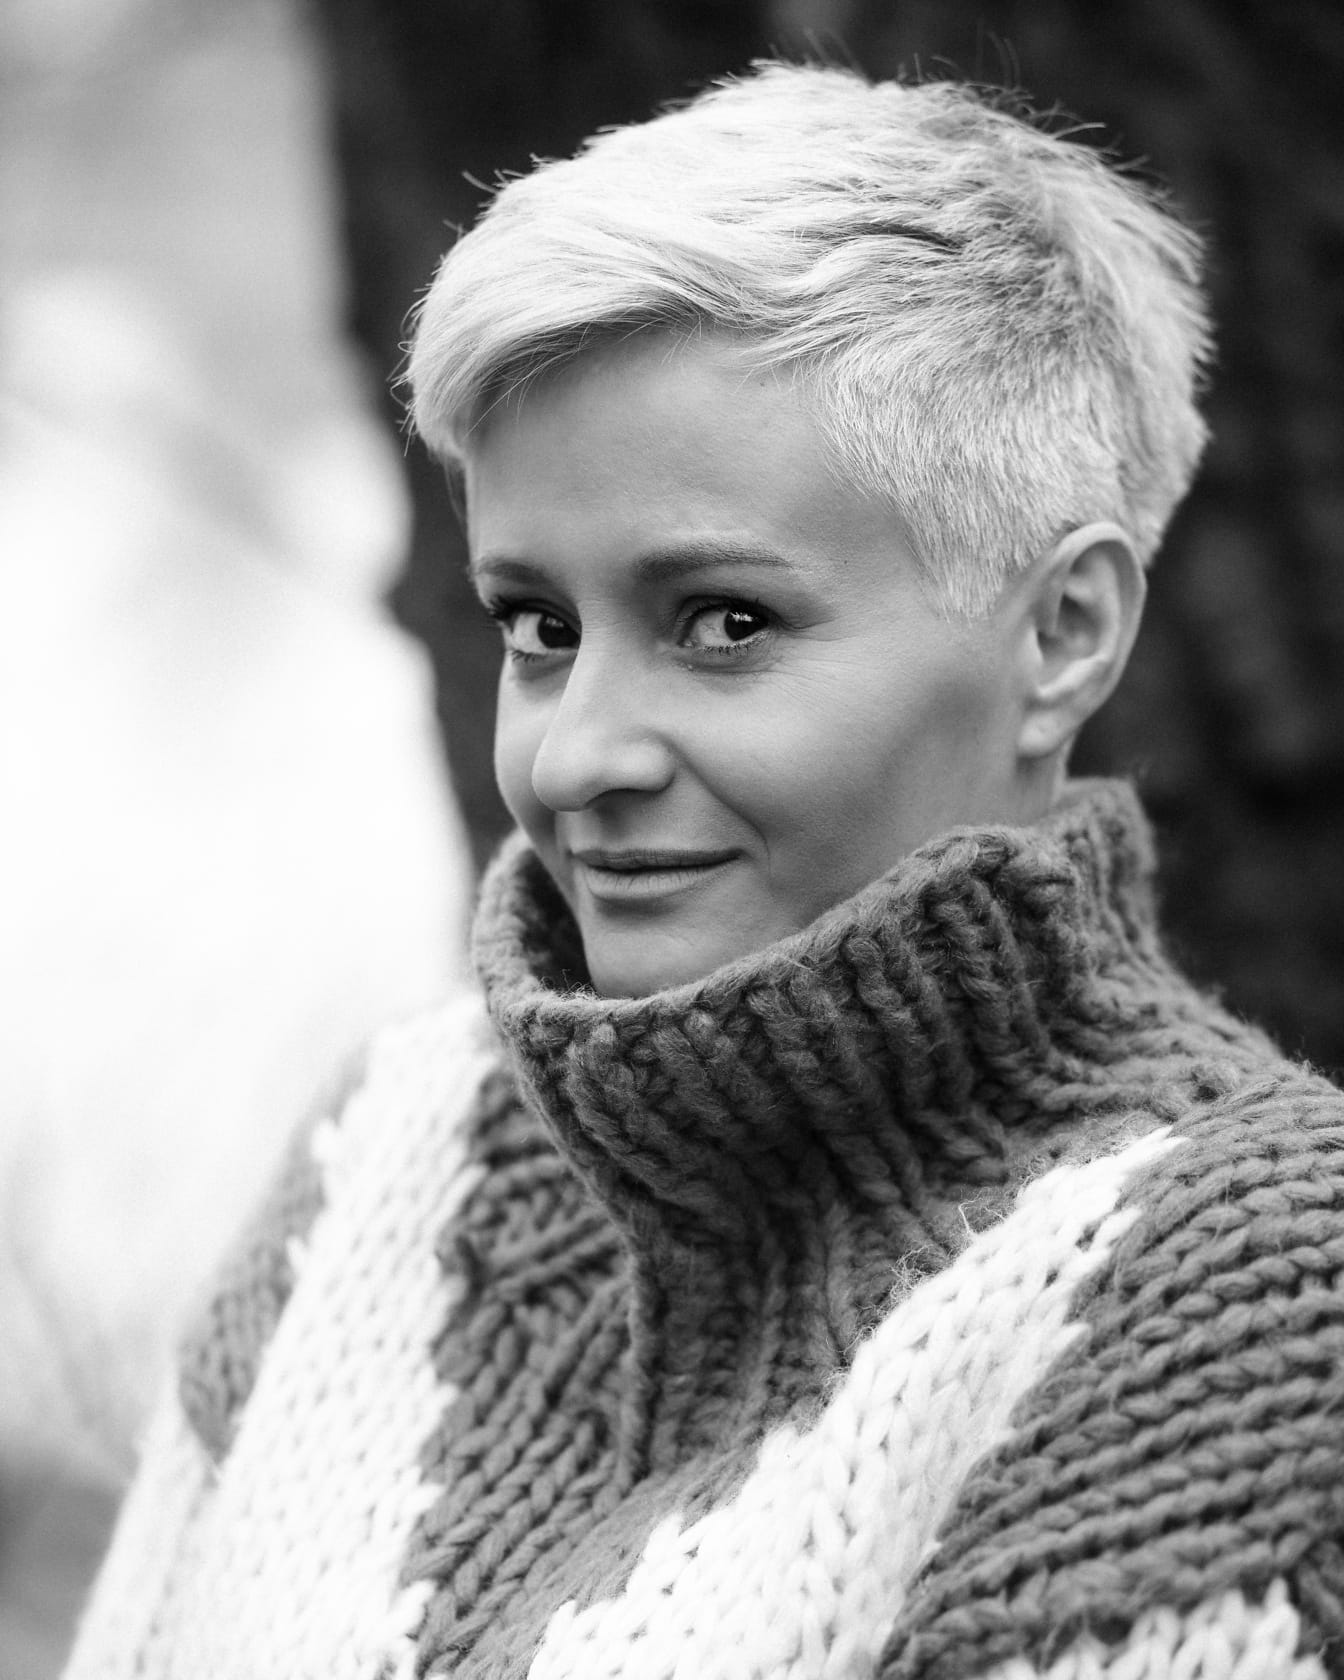 Monochrome portrait of blonde young woman in wool sweater